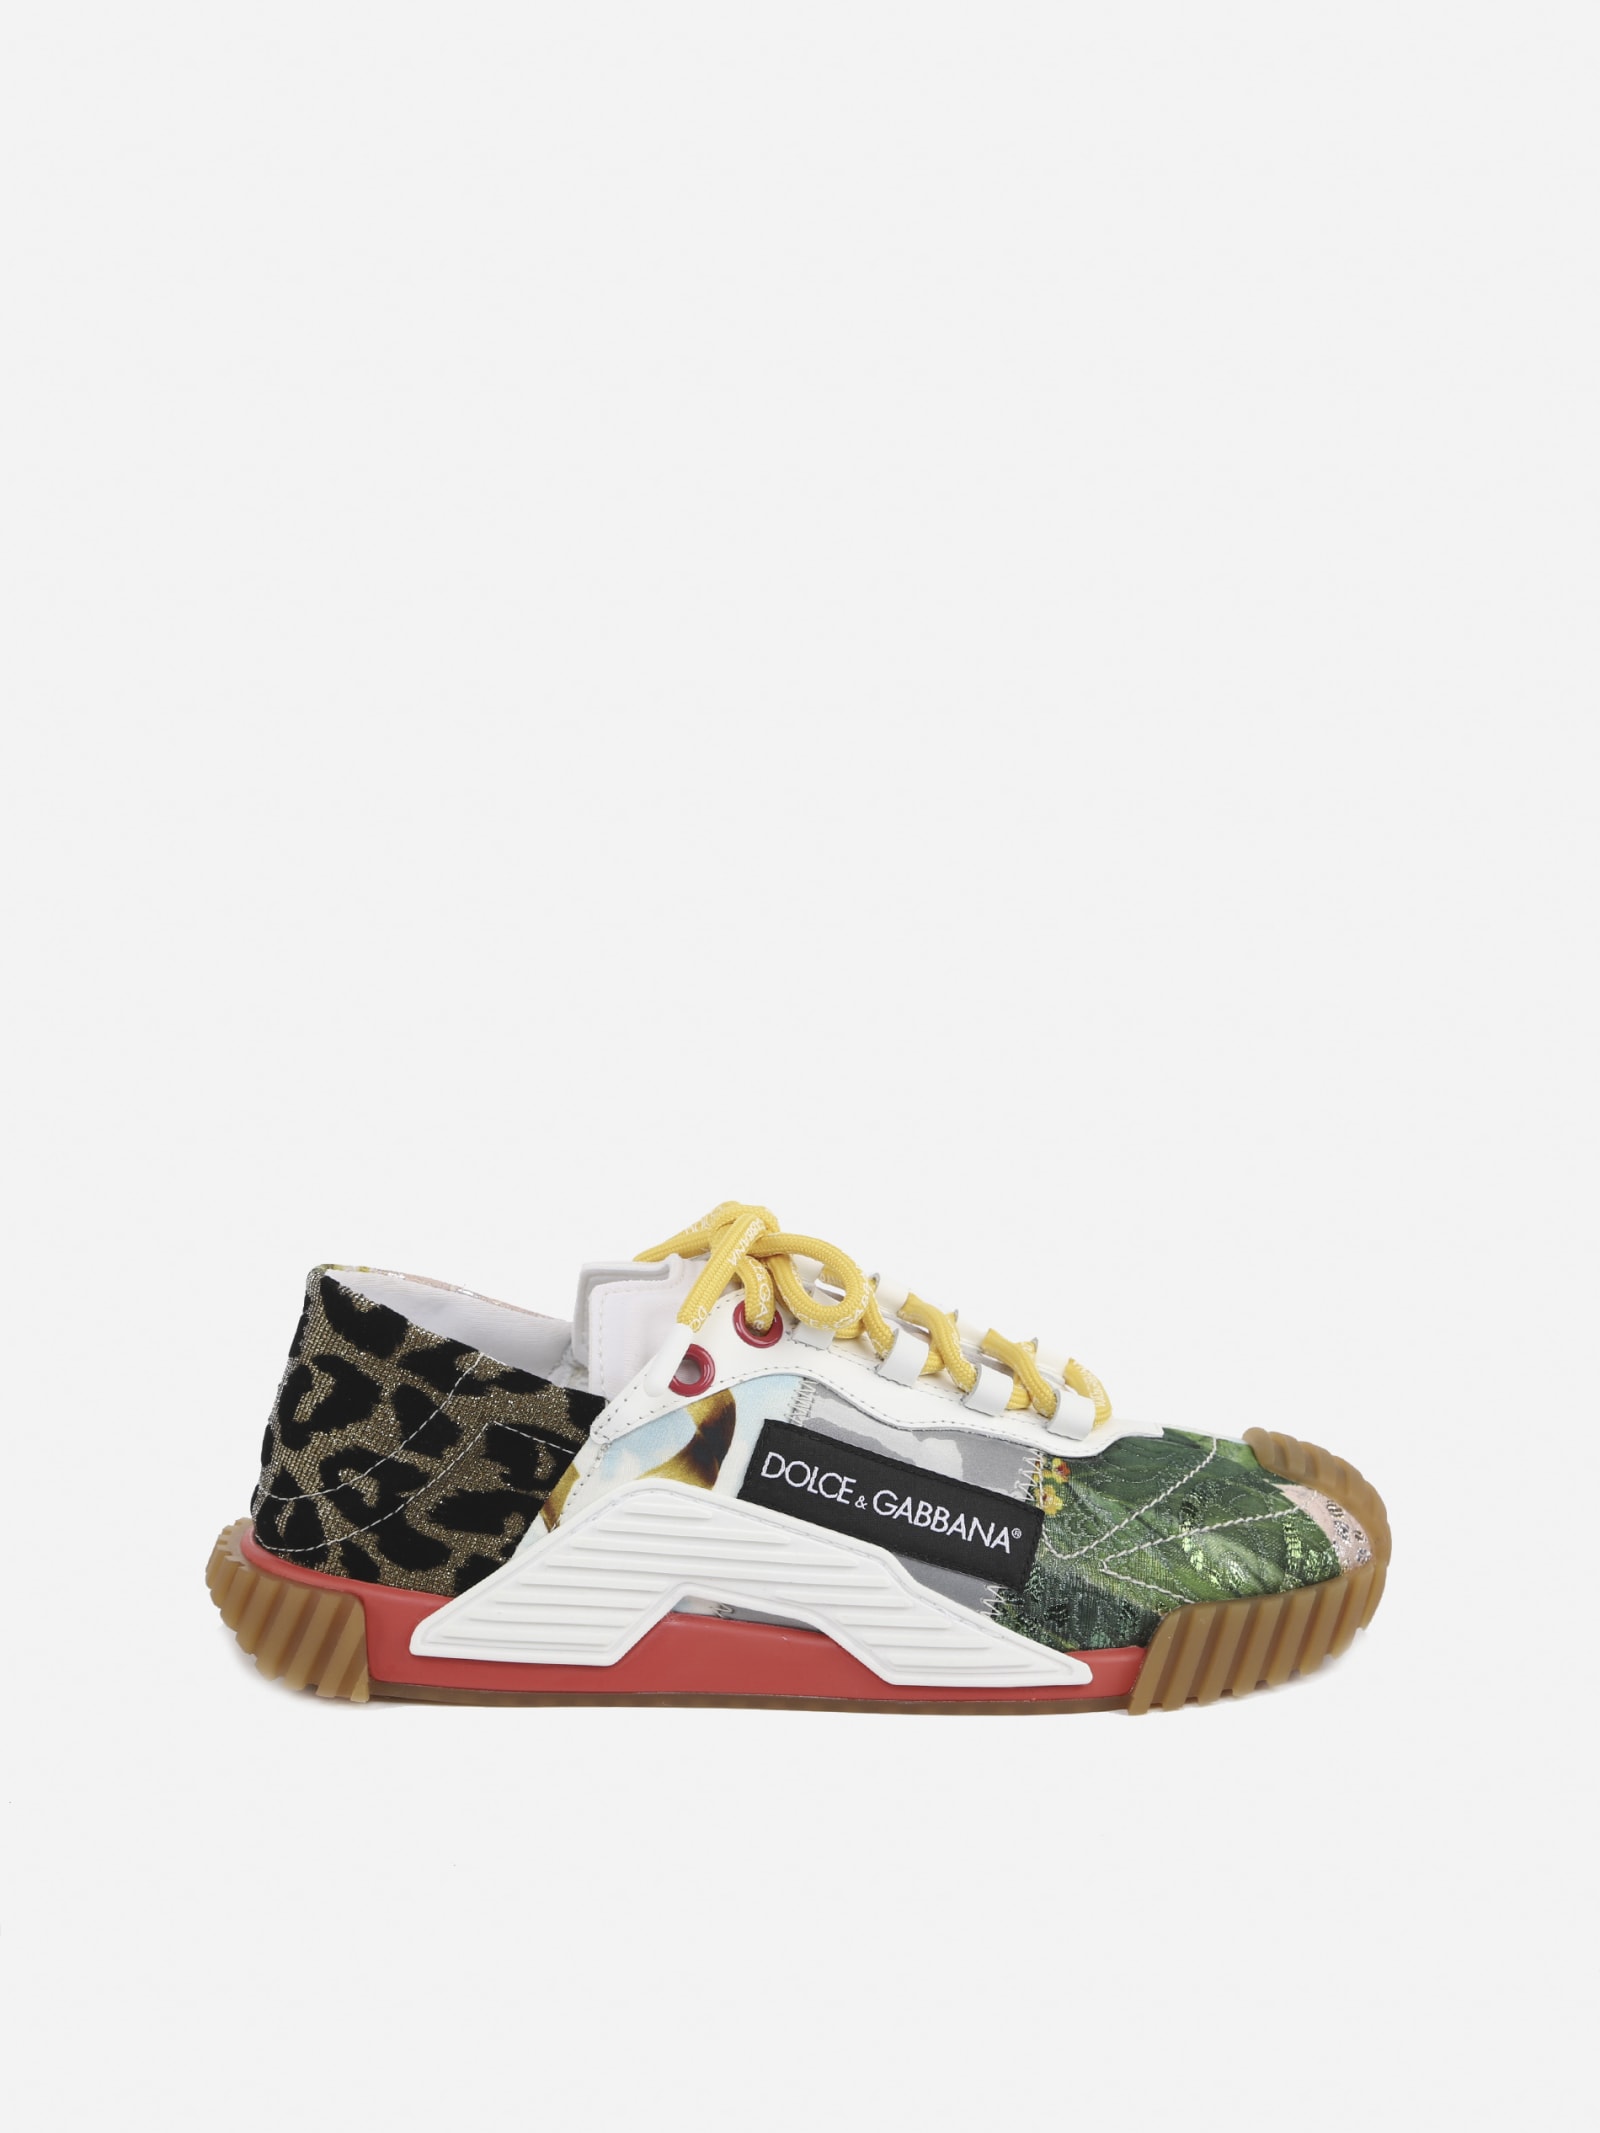 Buy Dolce & Gabbana Ns1 Slip-on Sneaker In Patchwork Fabric online, shop Dolce & Gabbana shoes with free shipping